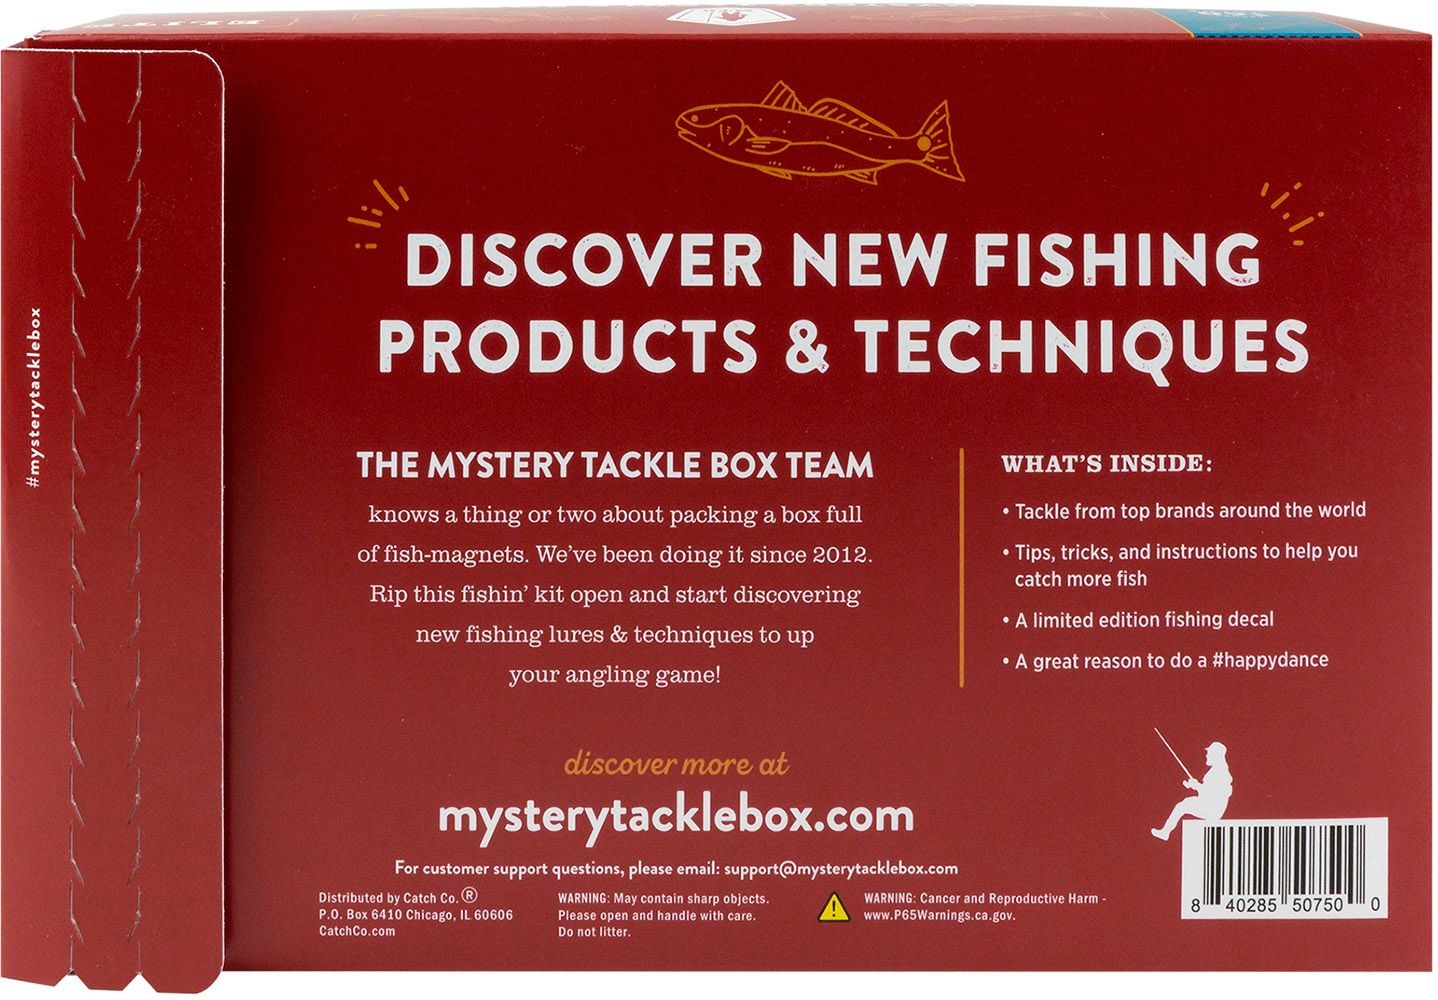 Dick's Sporting Goods Mystery Tackle Box Elite Inshore Saltwater